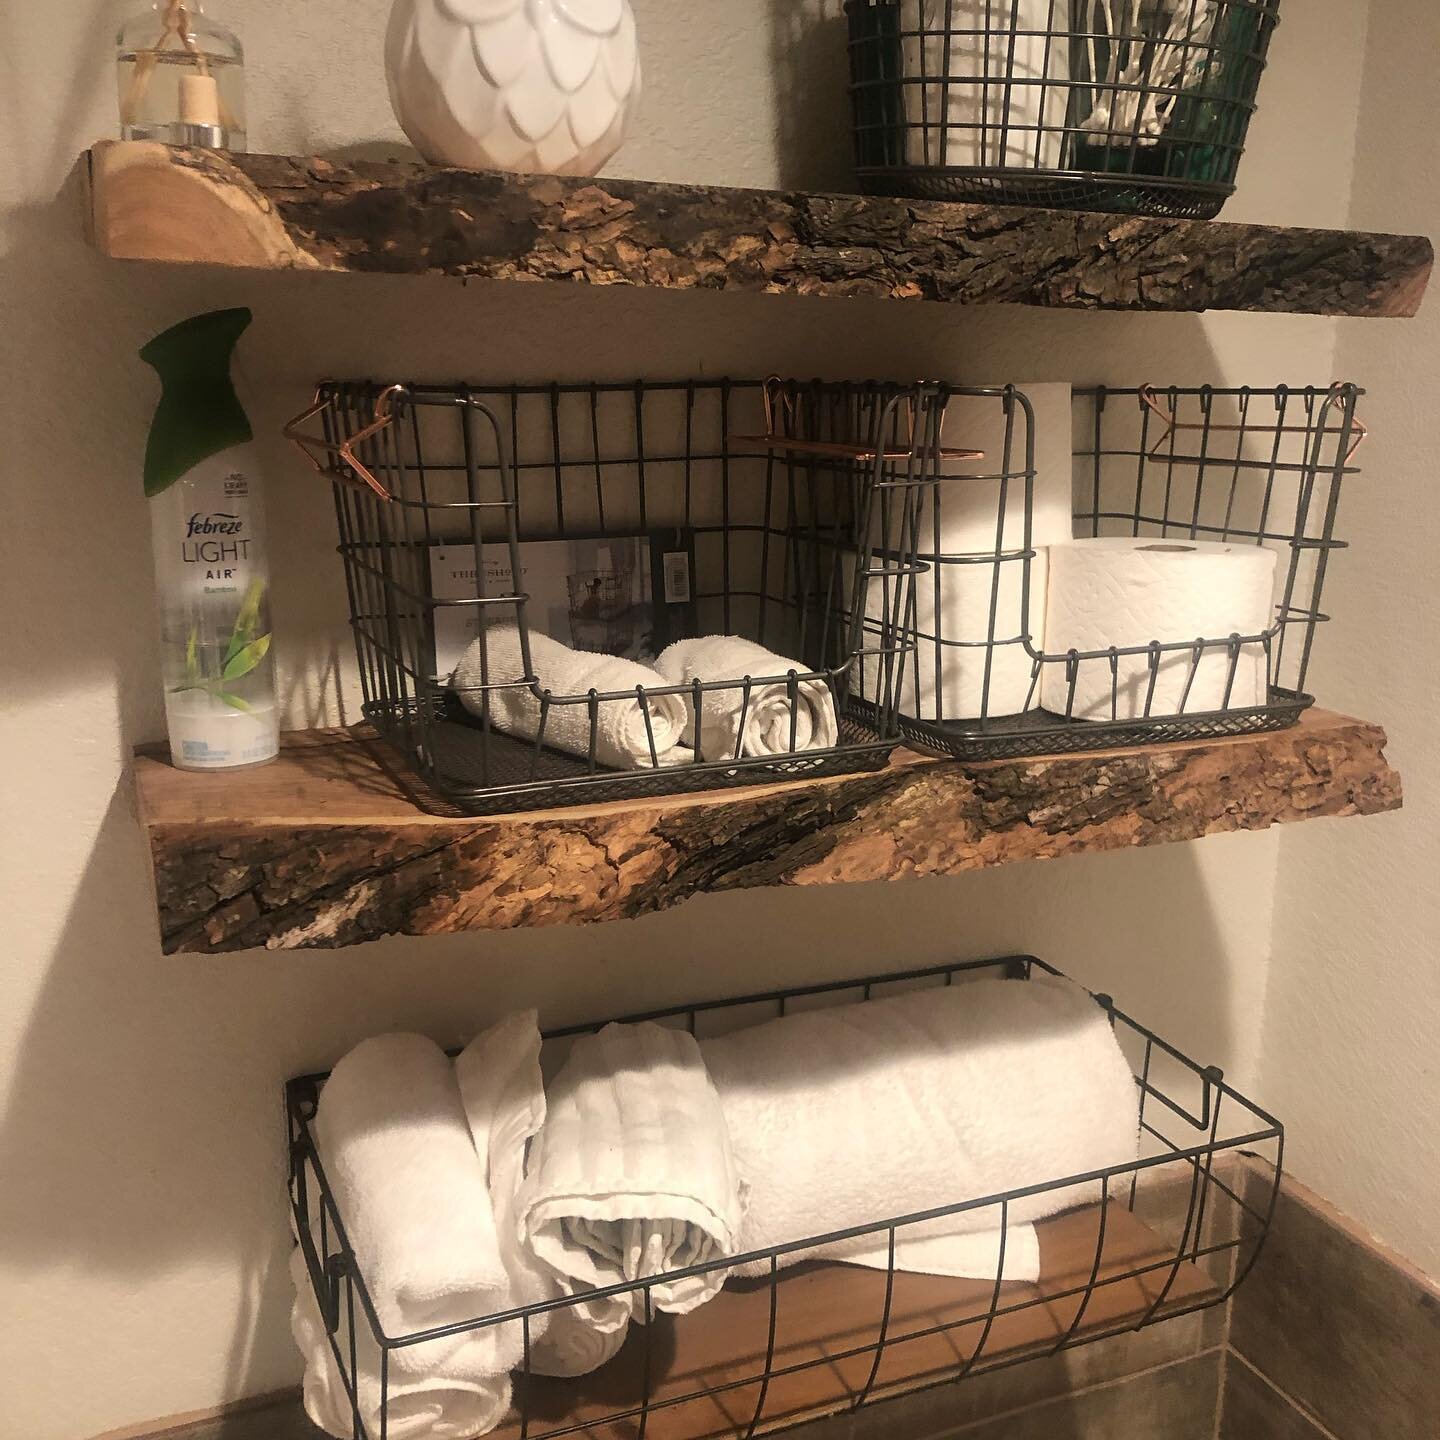 Mesquite Floating Shelves that the bride needed in the main office.